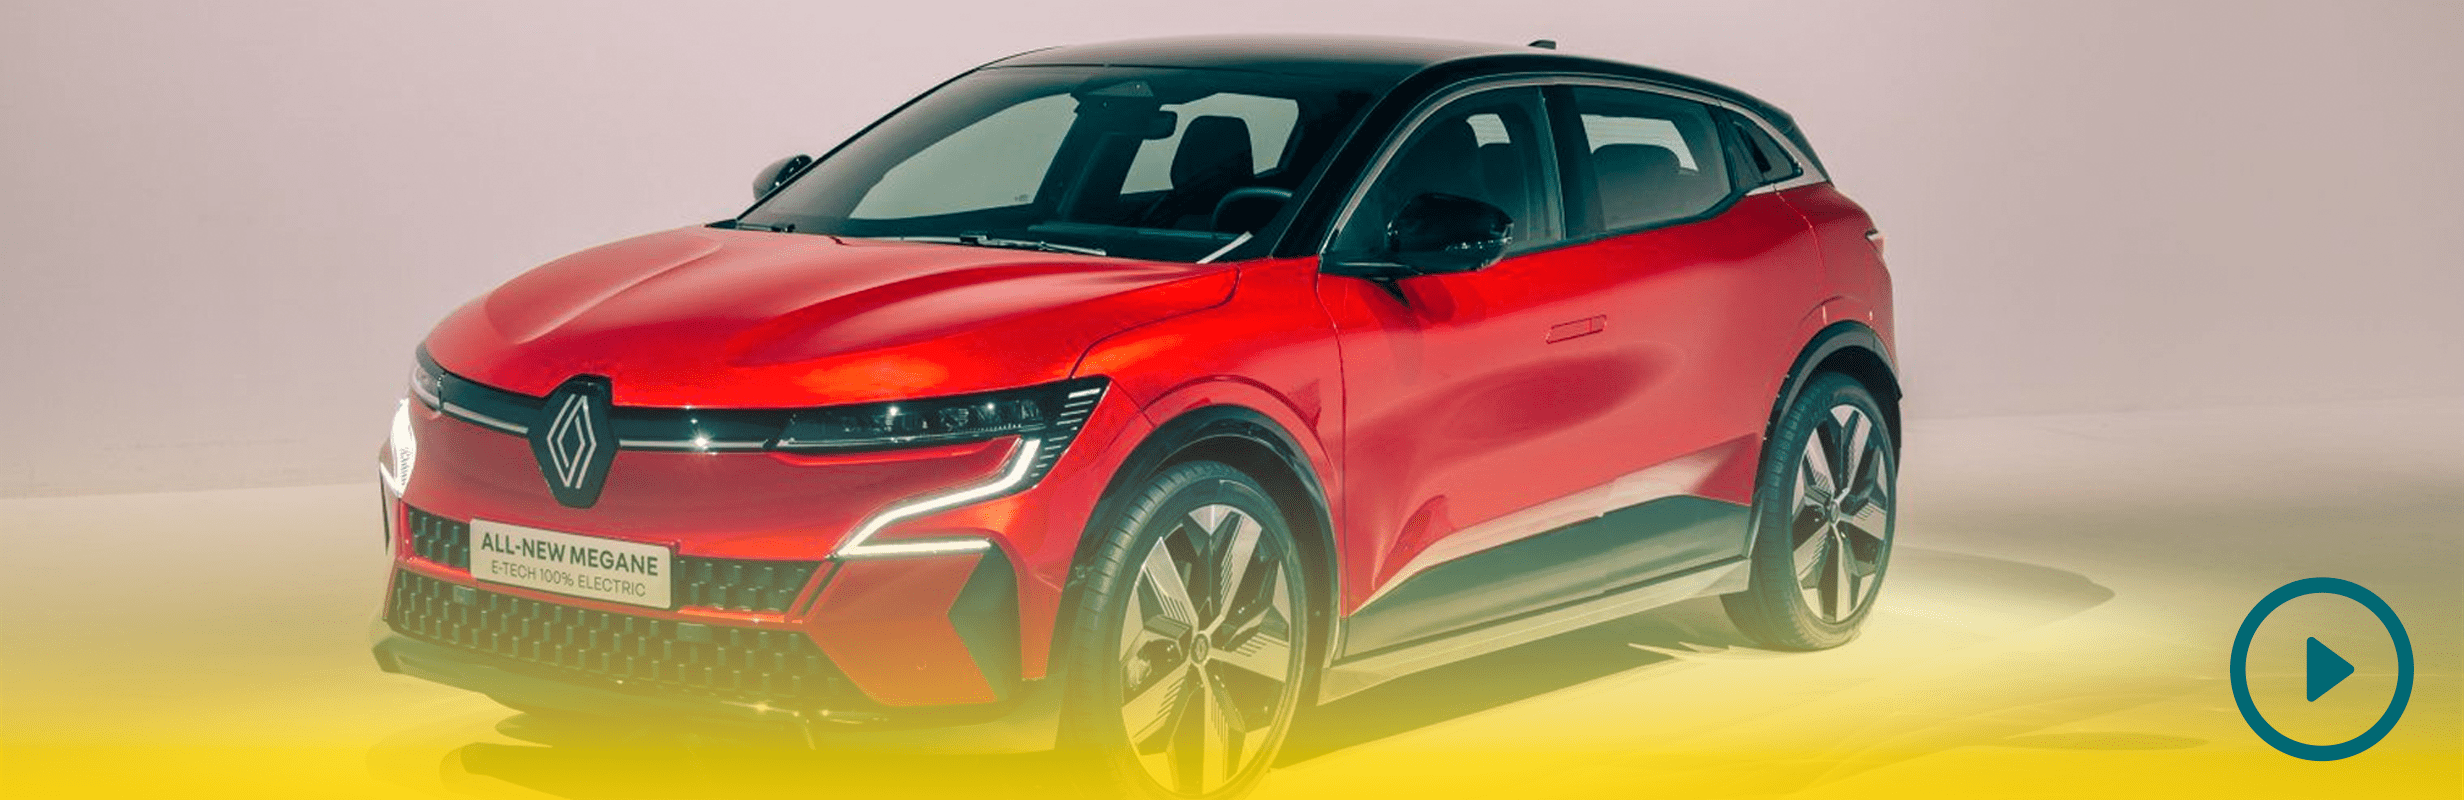 The 2023 Renault Megane E-Tech - The new all electric from Renault arriving in Ireland in 2023